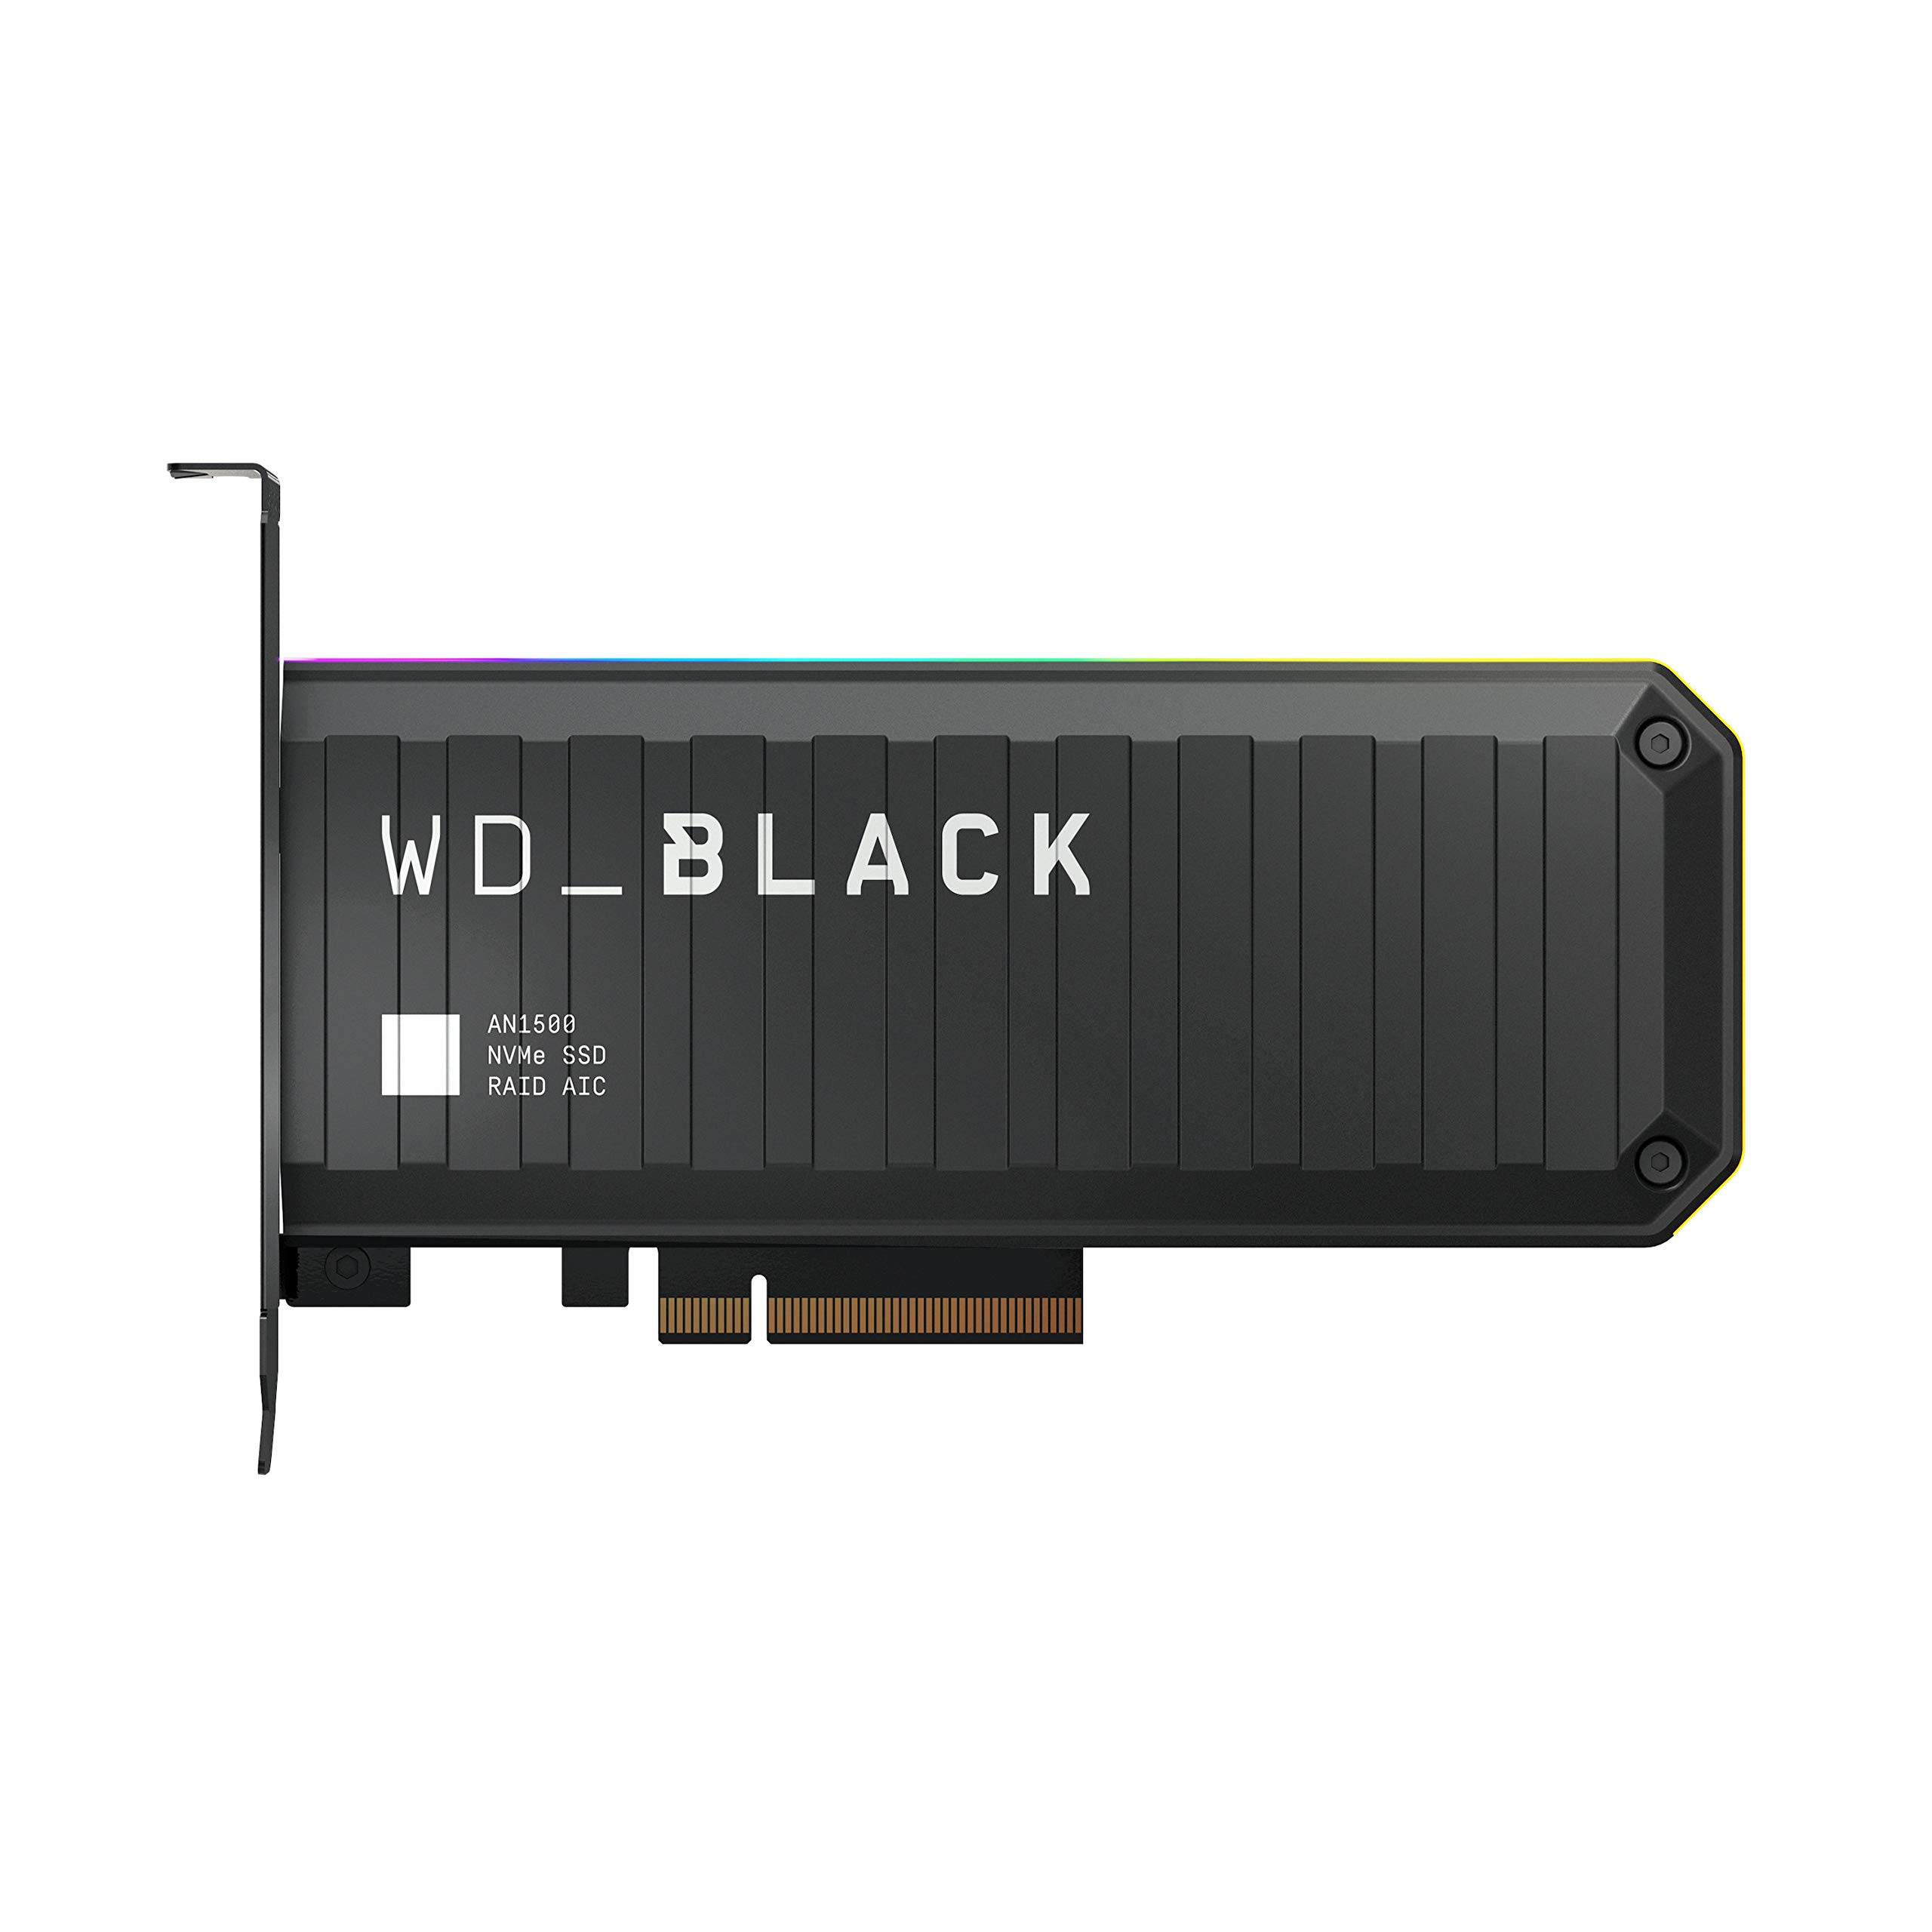 WD_BLACK 1TB AN1500 NVMe Internal Gaming Solid State Drive SSD Add-In-Card - Gen3 PCIe, Up to 6500 MB/s - WDS100T1X0L